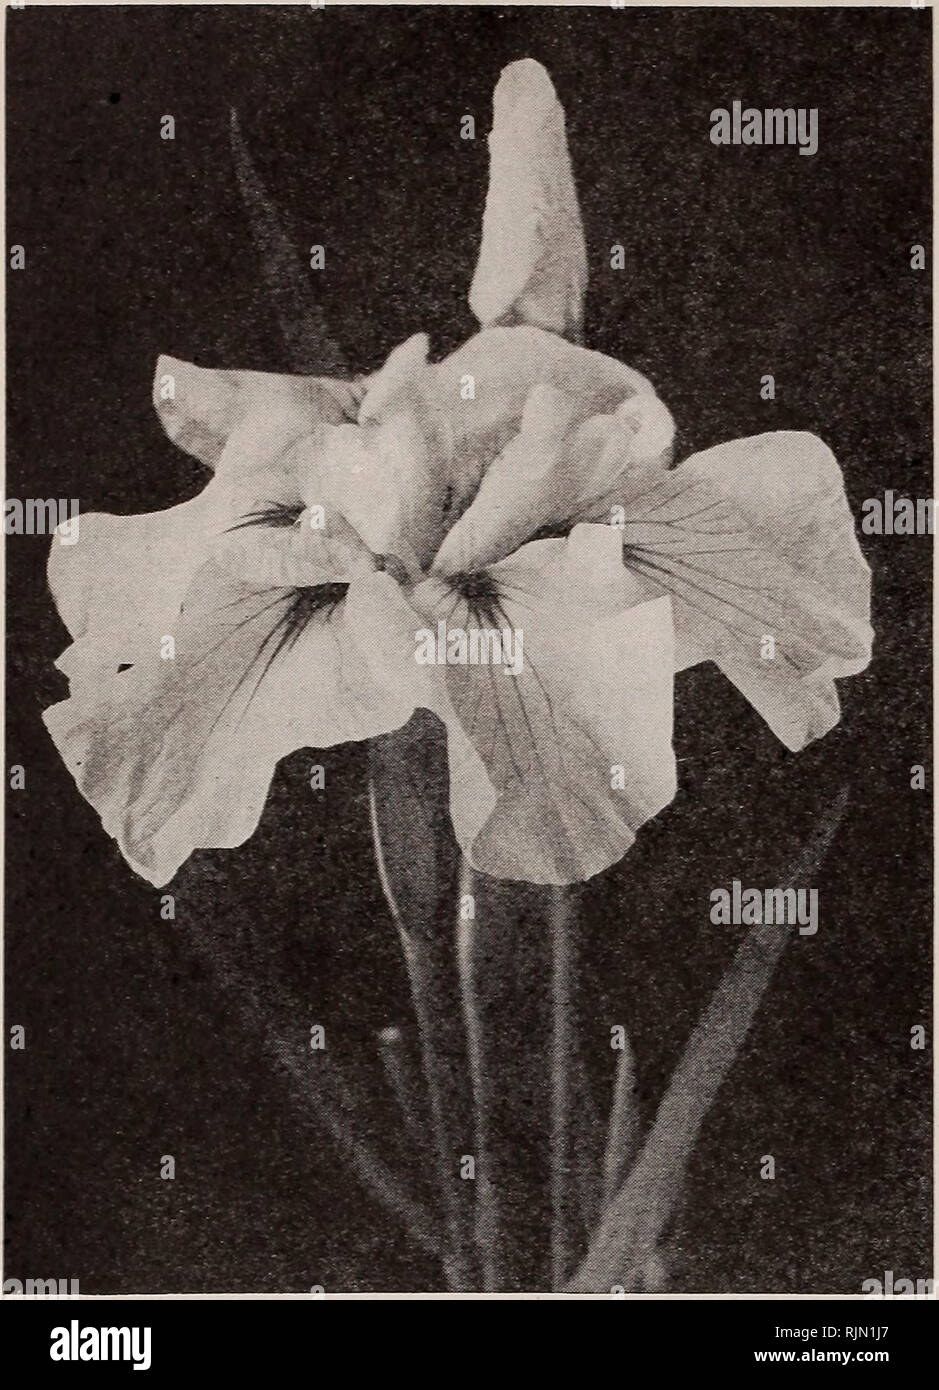 . Barnard's seeds, bulbs, shrubs 1917. Seeds Catalogs; Vegetables Seeds Catalogs; Flowers Seeds Catalogs; Fruit Seeds Catalogs; Nurseries (Horticulture) Catalogs. Japanese Iris GERMAN IRIS—Continued shade. The blending- of tints and colorings are rare for an iris. Each, 25c; doz., $2.50. Mad. Chereau. Pure white, edged with azure blue; falls deep white with blue penciling. Each, 15c; doz., $1.50. Mrs. H. Darwin. Pure white, falls slightly reticulated vio- let at the base; very beautiful and free flowering. 2 ft. Early. Each, 20c; doz., $2.00. Pauline. Standards bright blue, falls a little dark Stock Photo